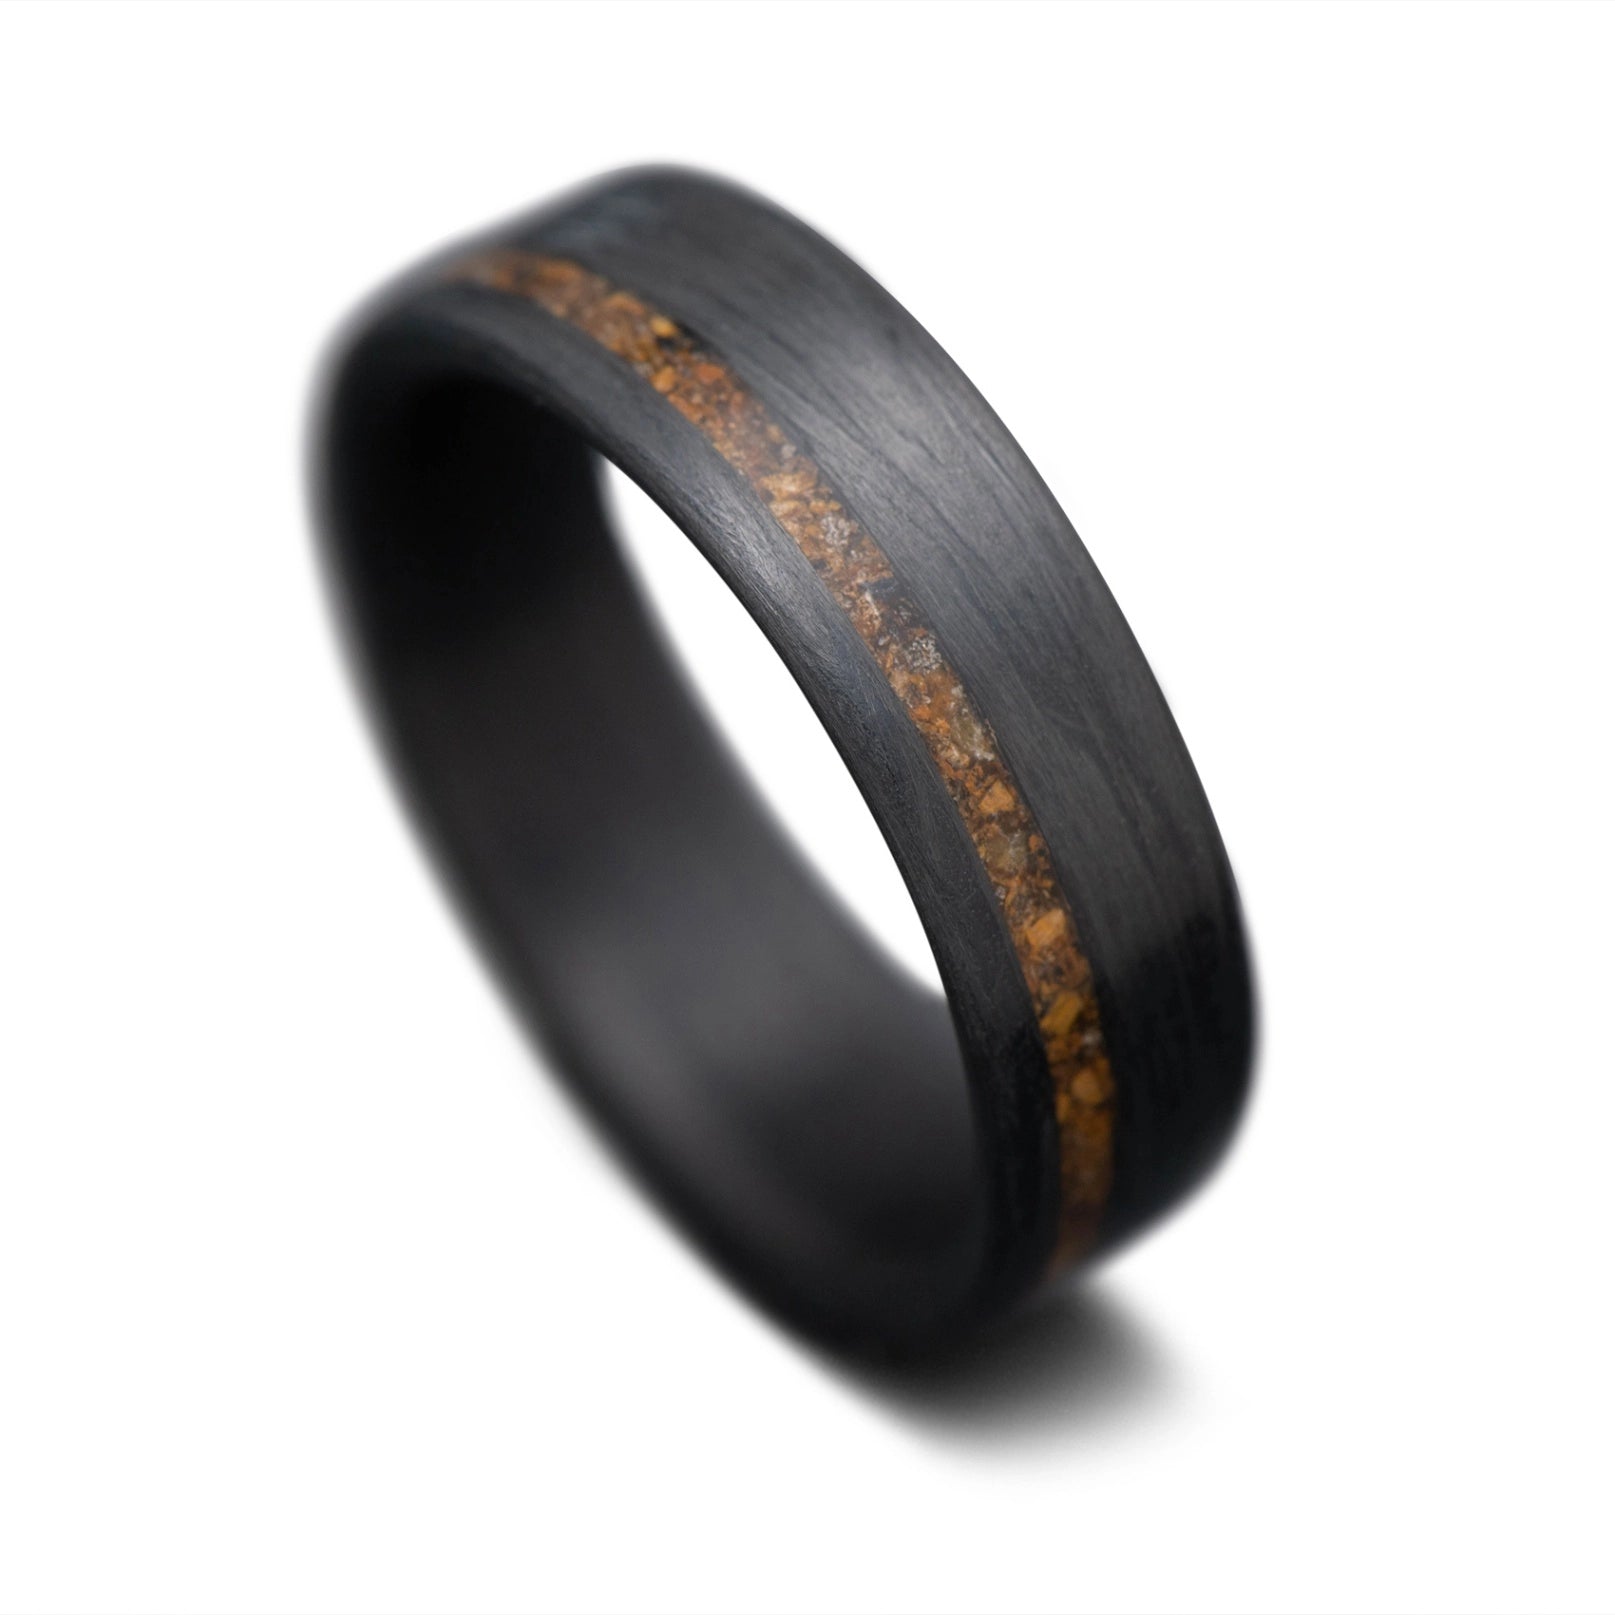  CarbonUni Core ring with  Tiger Eye inlay, 7mm -THE VERTEX